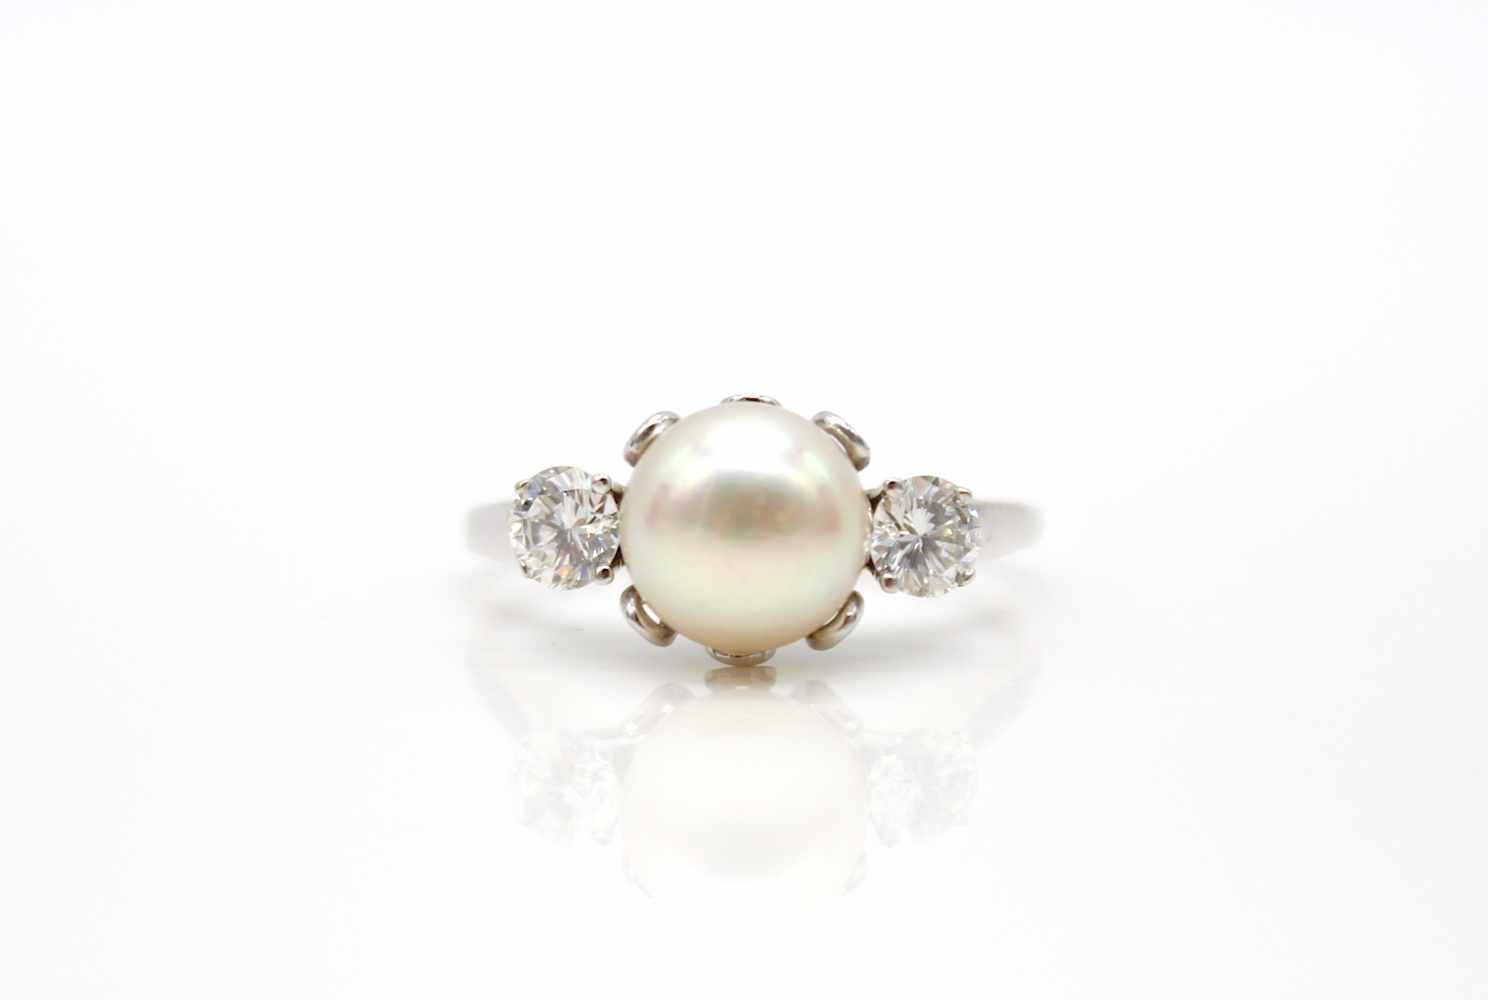 Ring in 585 white gold with one cultured pearl and 2 diamonds, total approx. 0.40 ct in high